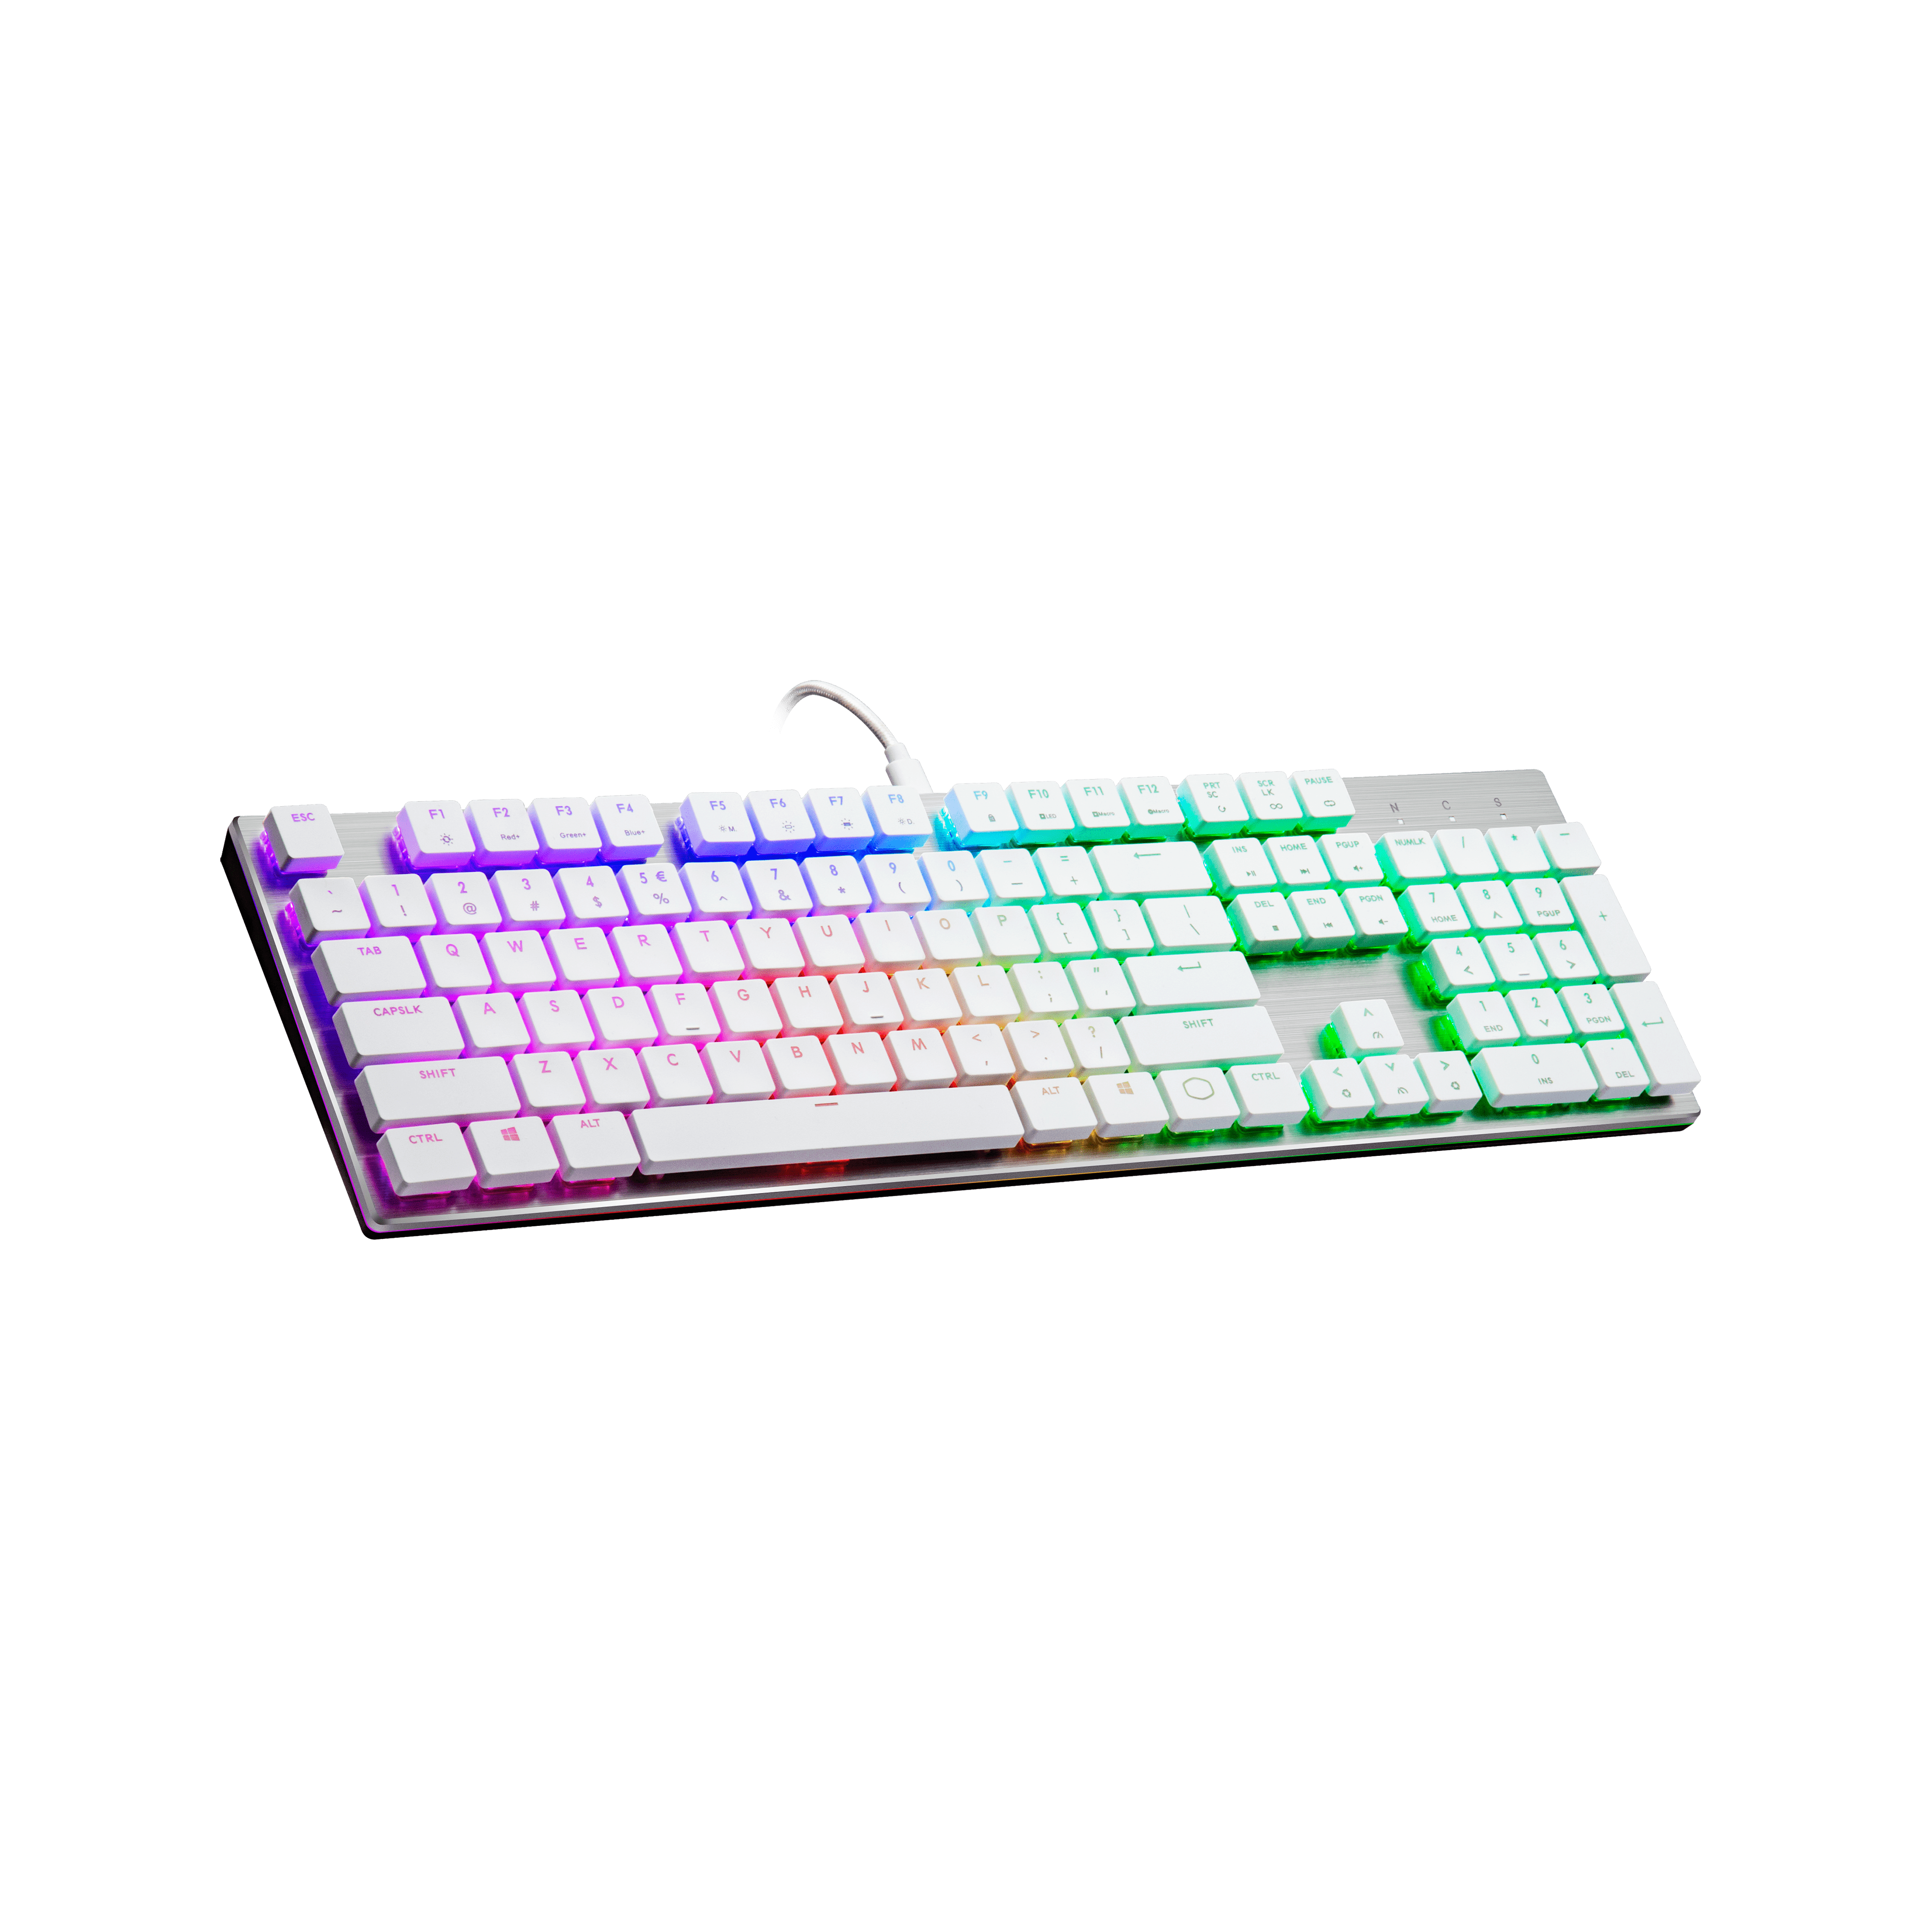 Cooler Master SK650 White Limited Edition Mechanical Keyboard with Cherry MX Low Profile RGB Switches in Brushed Aluminum Design Full 